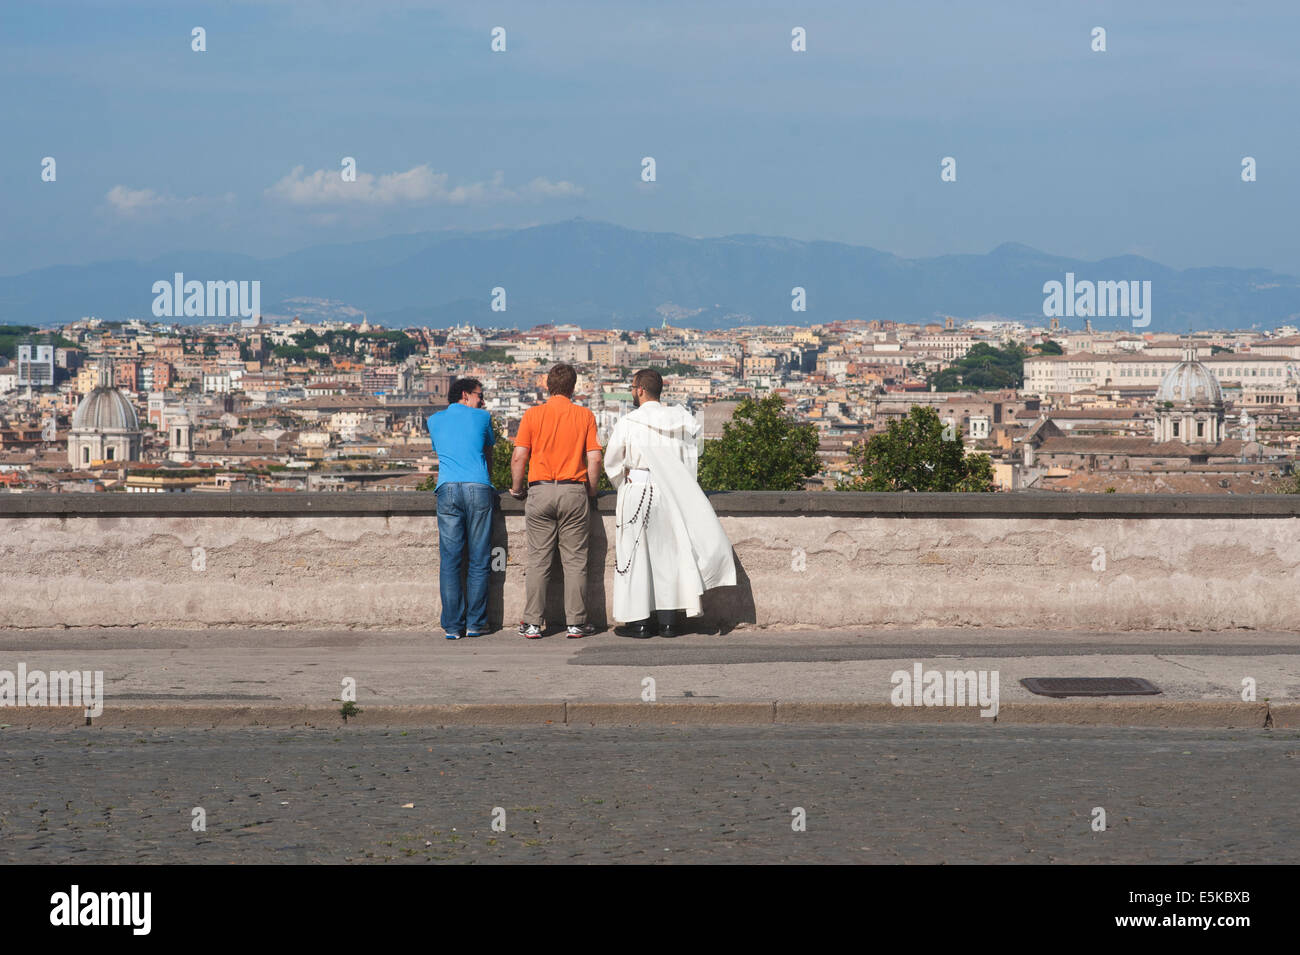 Rome Italy 2014 - People tourists looking at cityscape Stock Photo